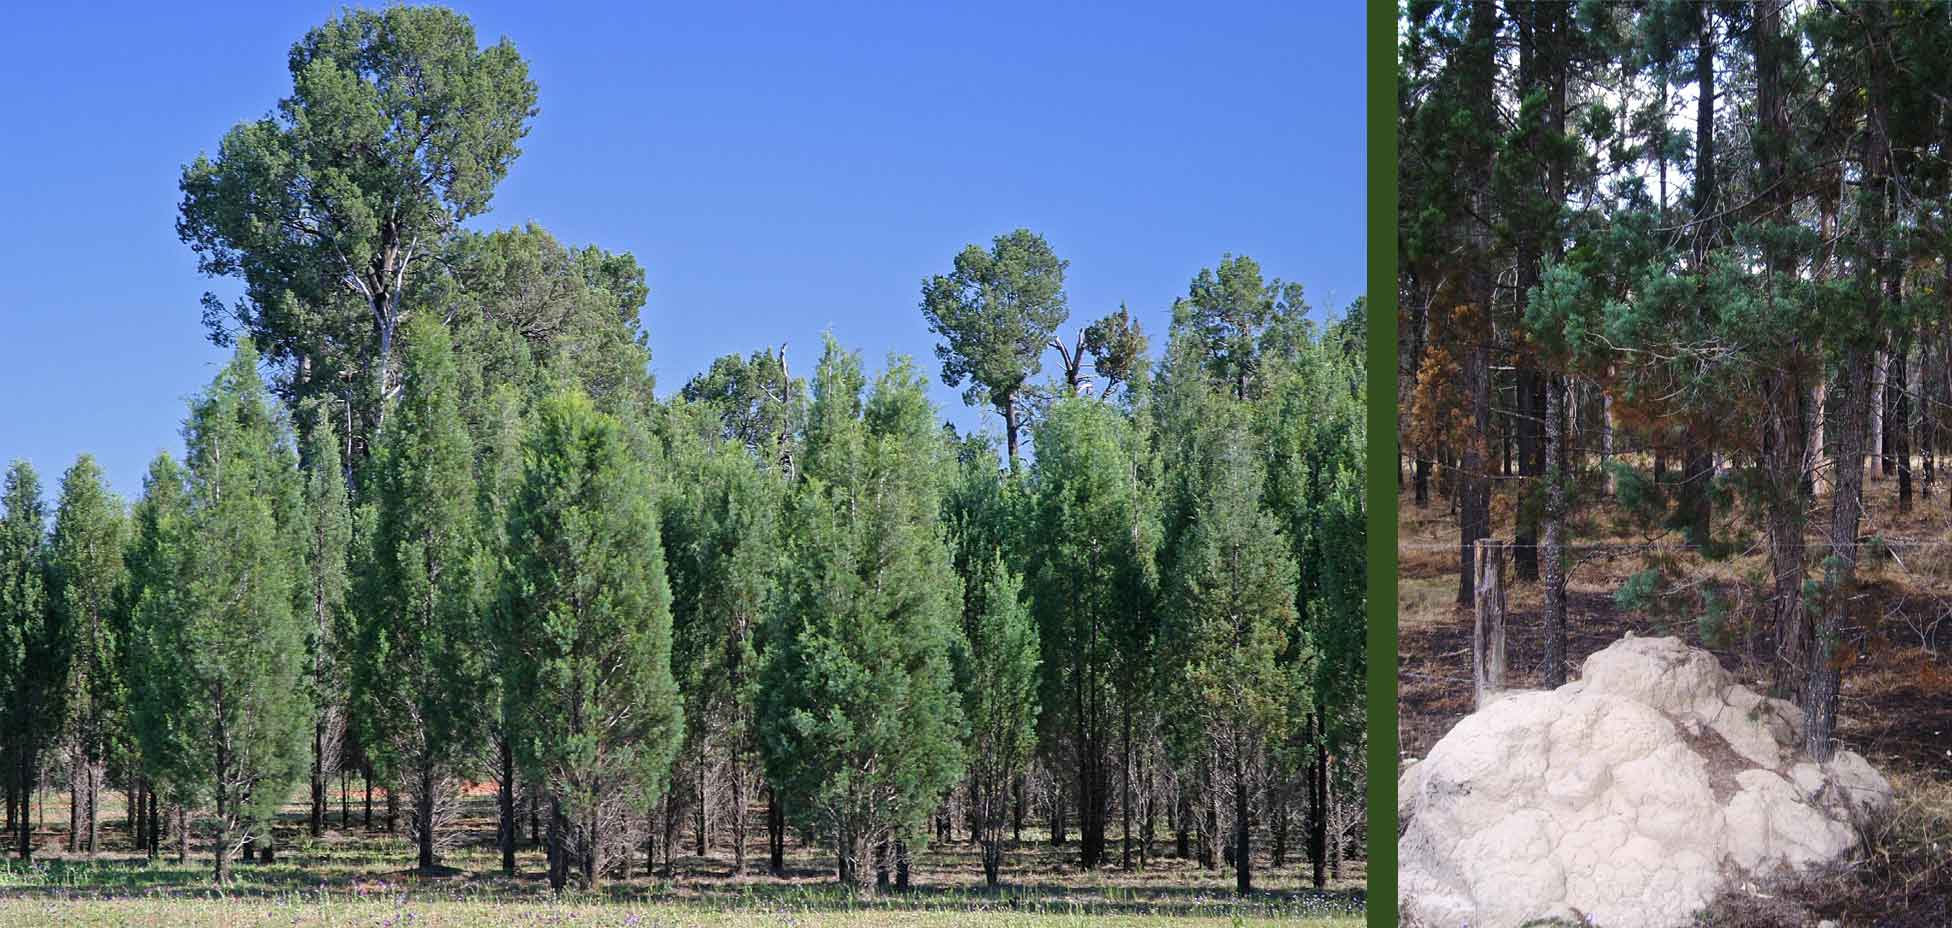 cypress trees and cypress tree growing in termite nest